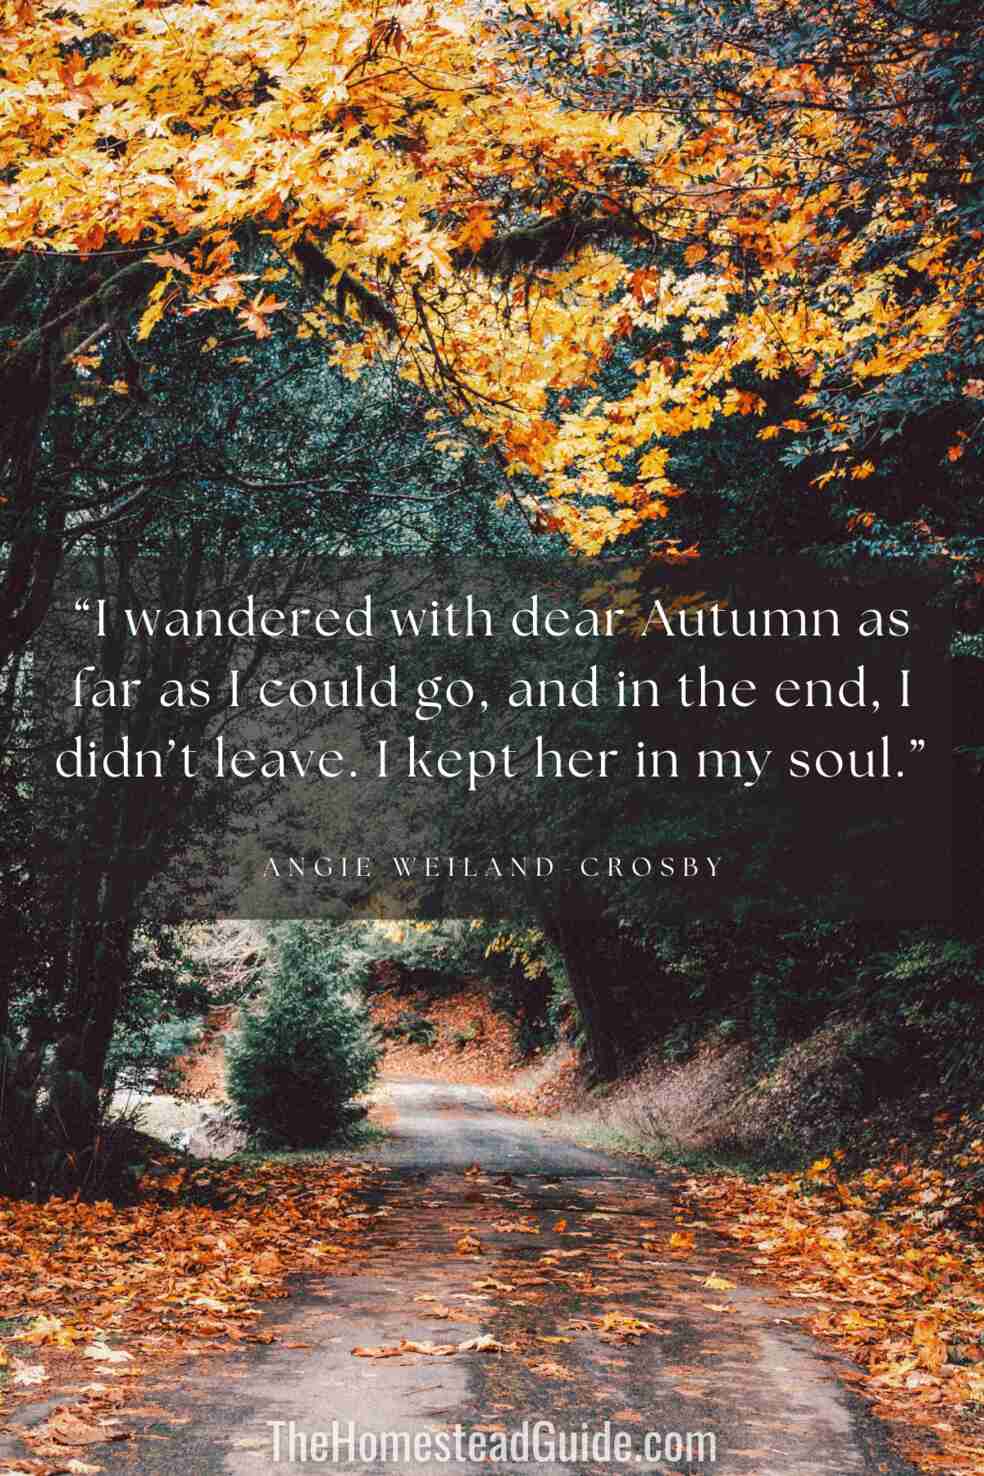 I wandered with dear Autumn as far as I could go, and in the end, I didnt leave. I kept her in my soul.